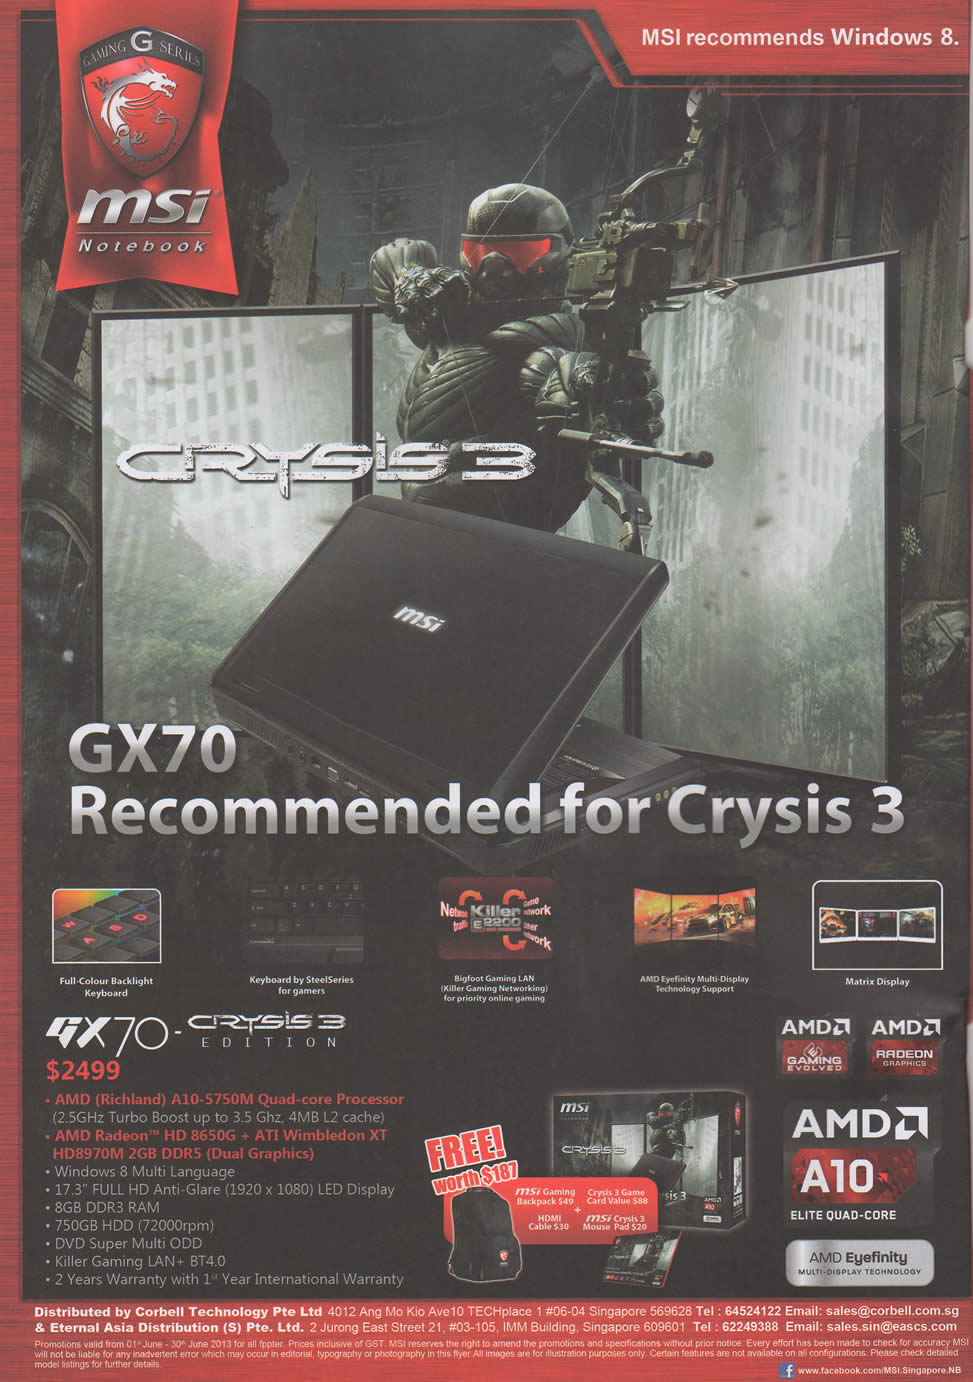 PC SHOW 2013 price list image brochure of MSI Notebook GX70 Crysis 3